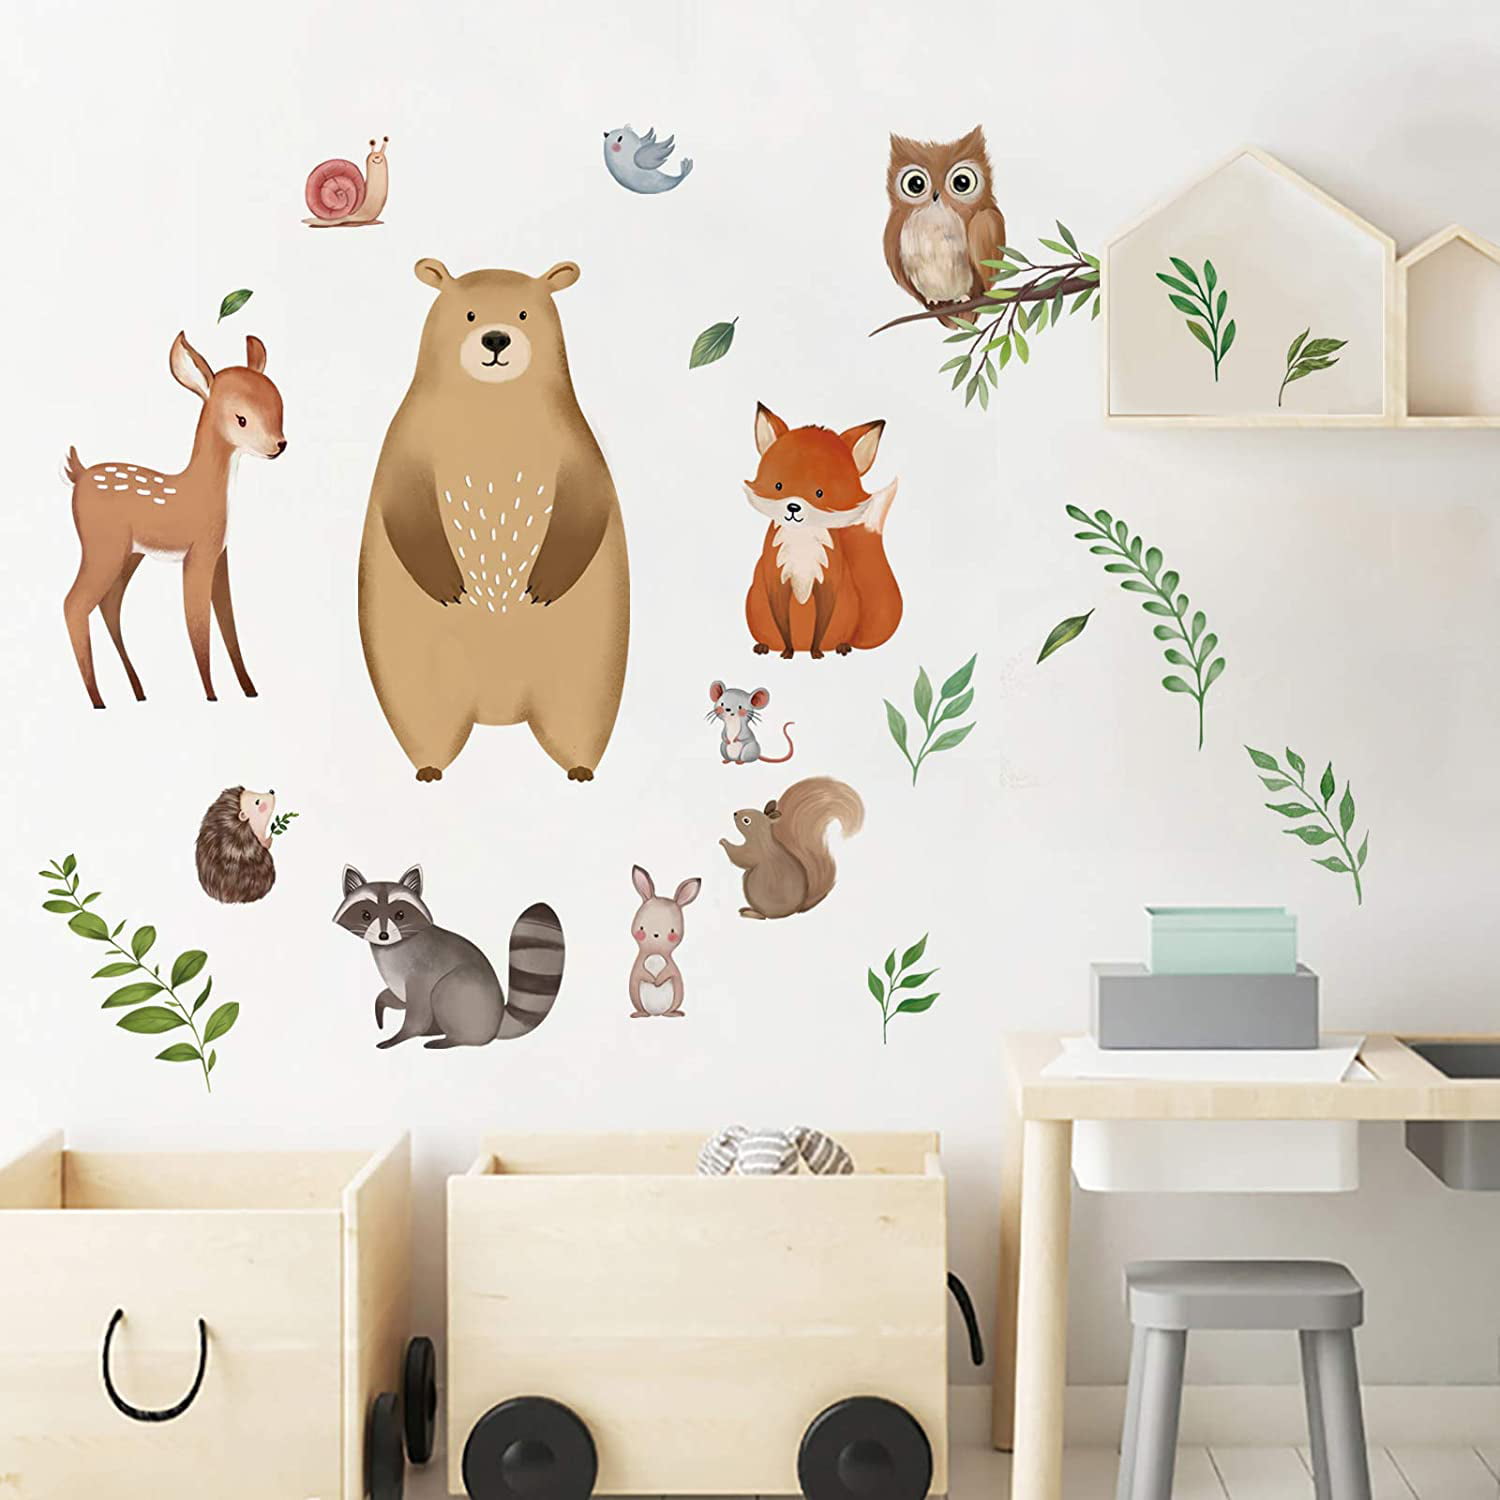 80 Pcs Bear Fox Deer Wall Decals Woodland Wall Stickers for Baby Room Playroom Decoration Jungle Wall Stickers Safari Wall Stickers for Nursery Decor TOARTI Animal Wall Stickers for Kids Bedrooms